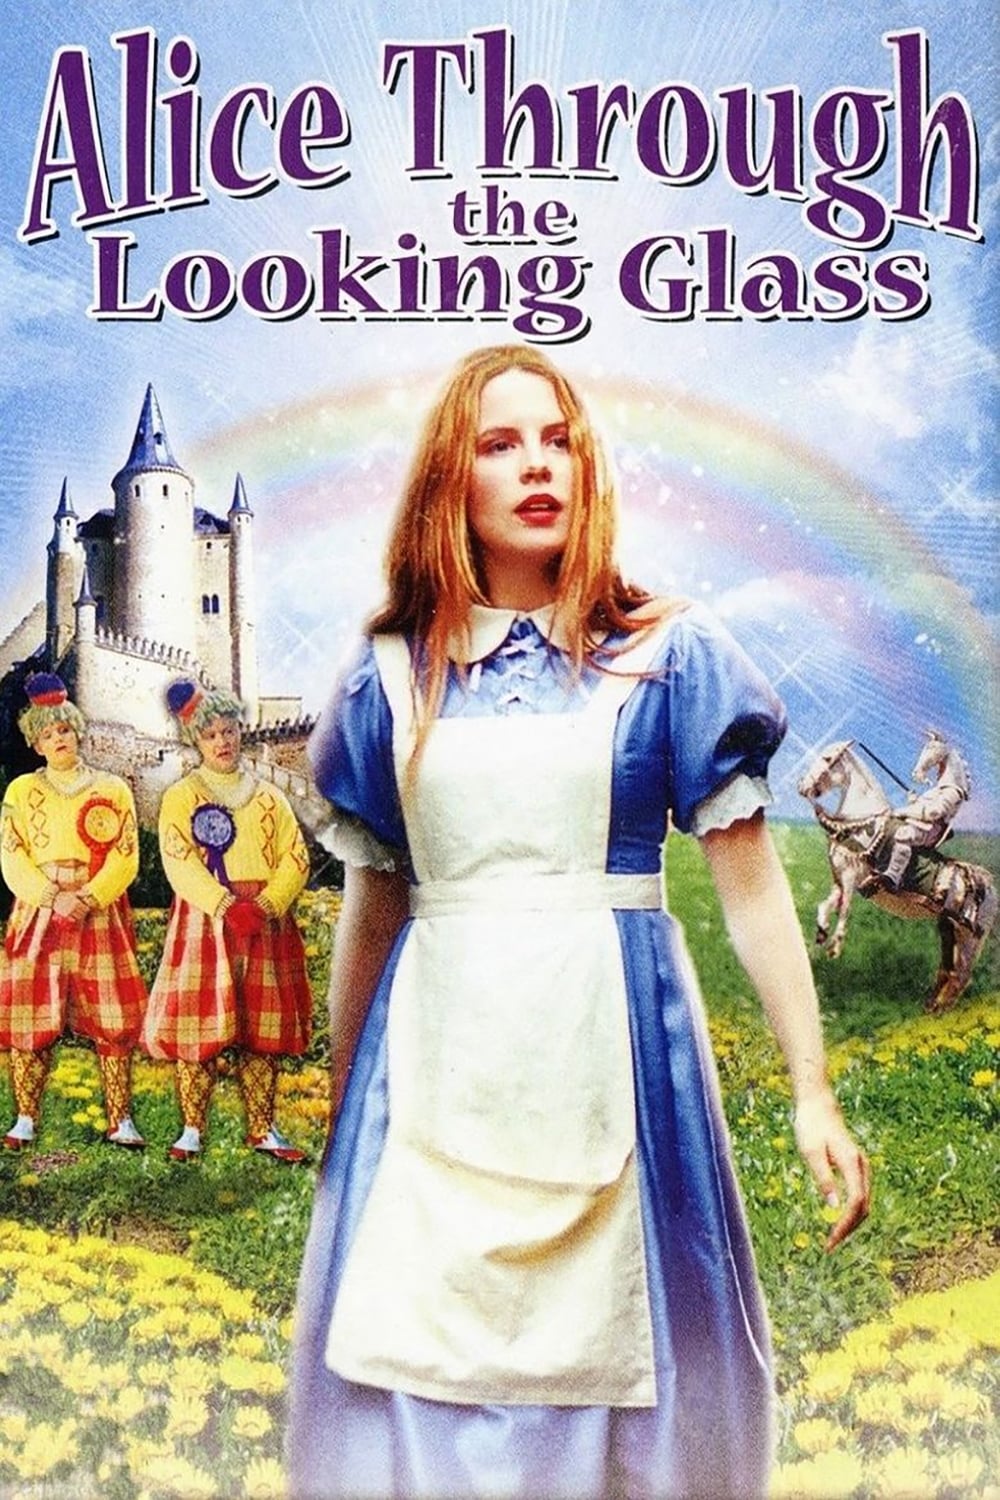 Alice Through the Looking Glass film